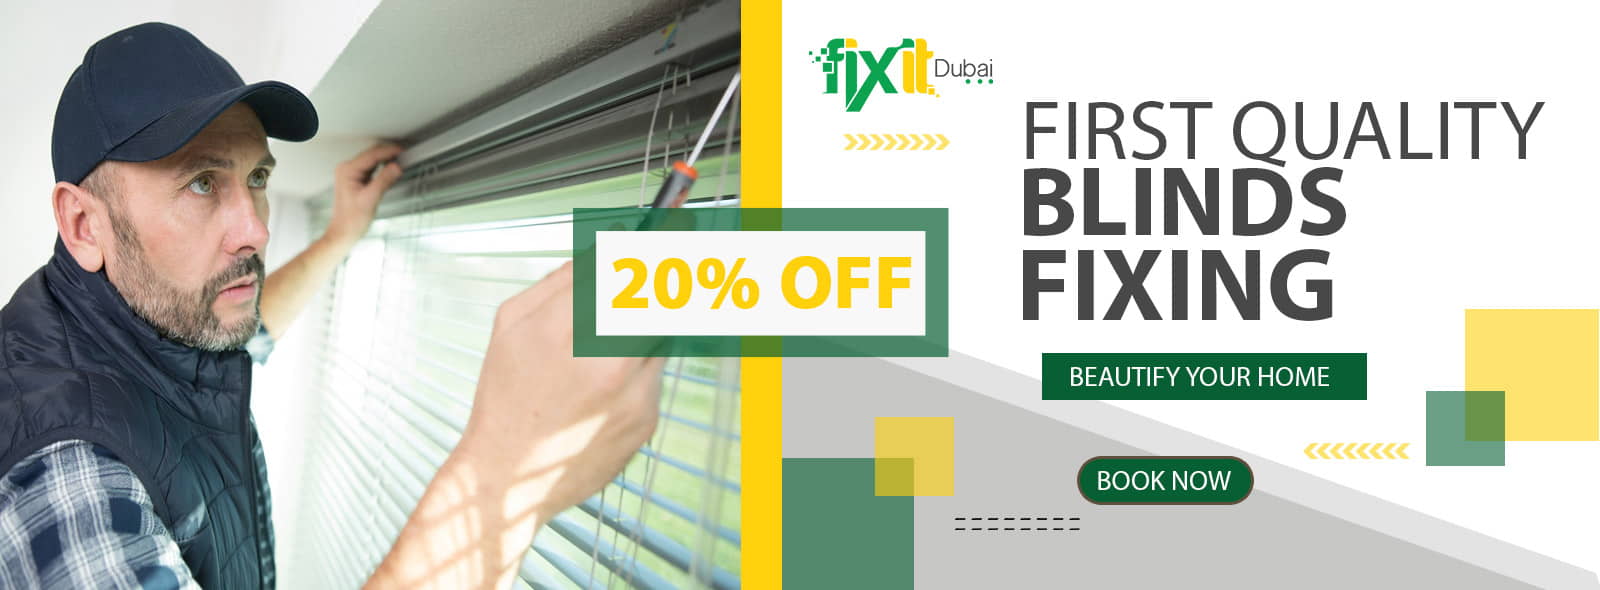 First-Quality-Blinds-Fixing-Dubai